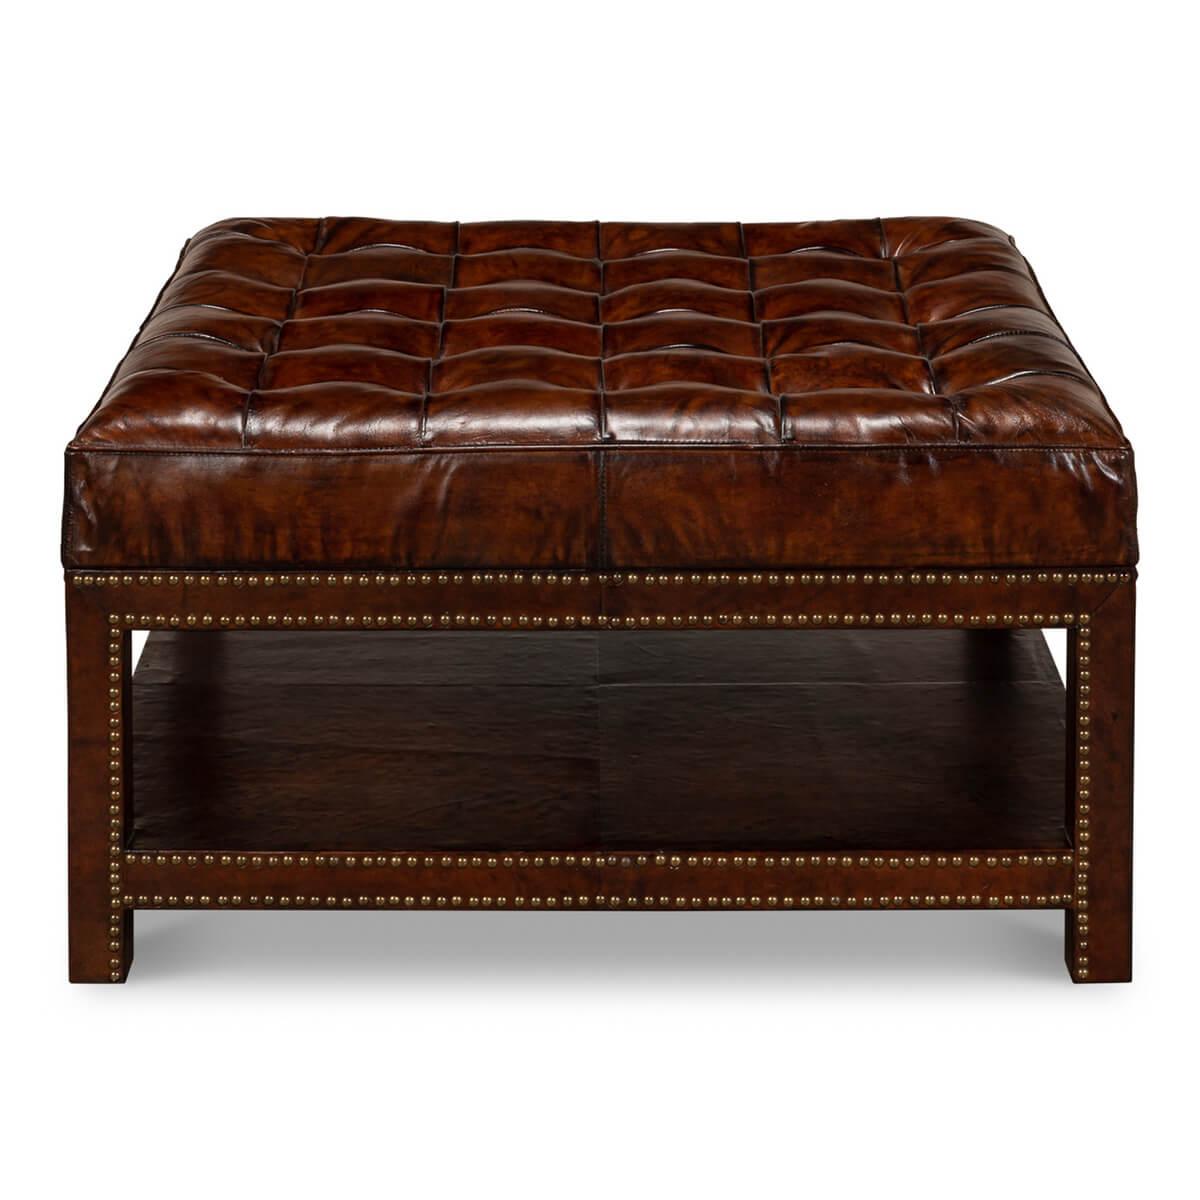 Vintage-style leather tufted ottoman in brown leather. It features a solid hardwood frame wrapped in rich brown leather detailed with nailhead brass trim. The cushioned top is fixed to the base with a tufted button pattern. 

Dimensions: 36